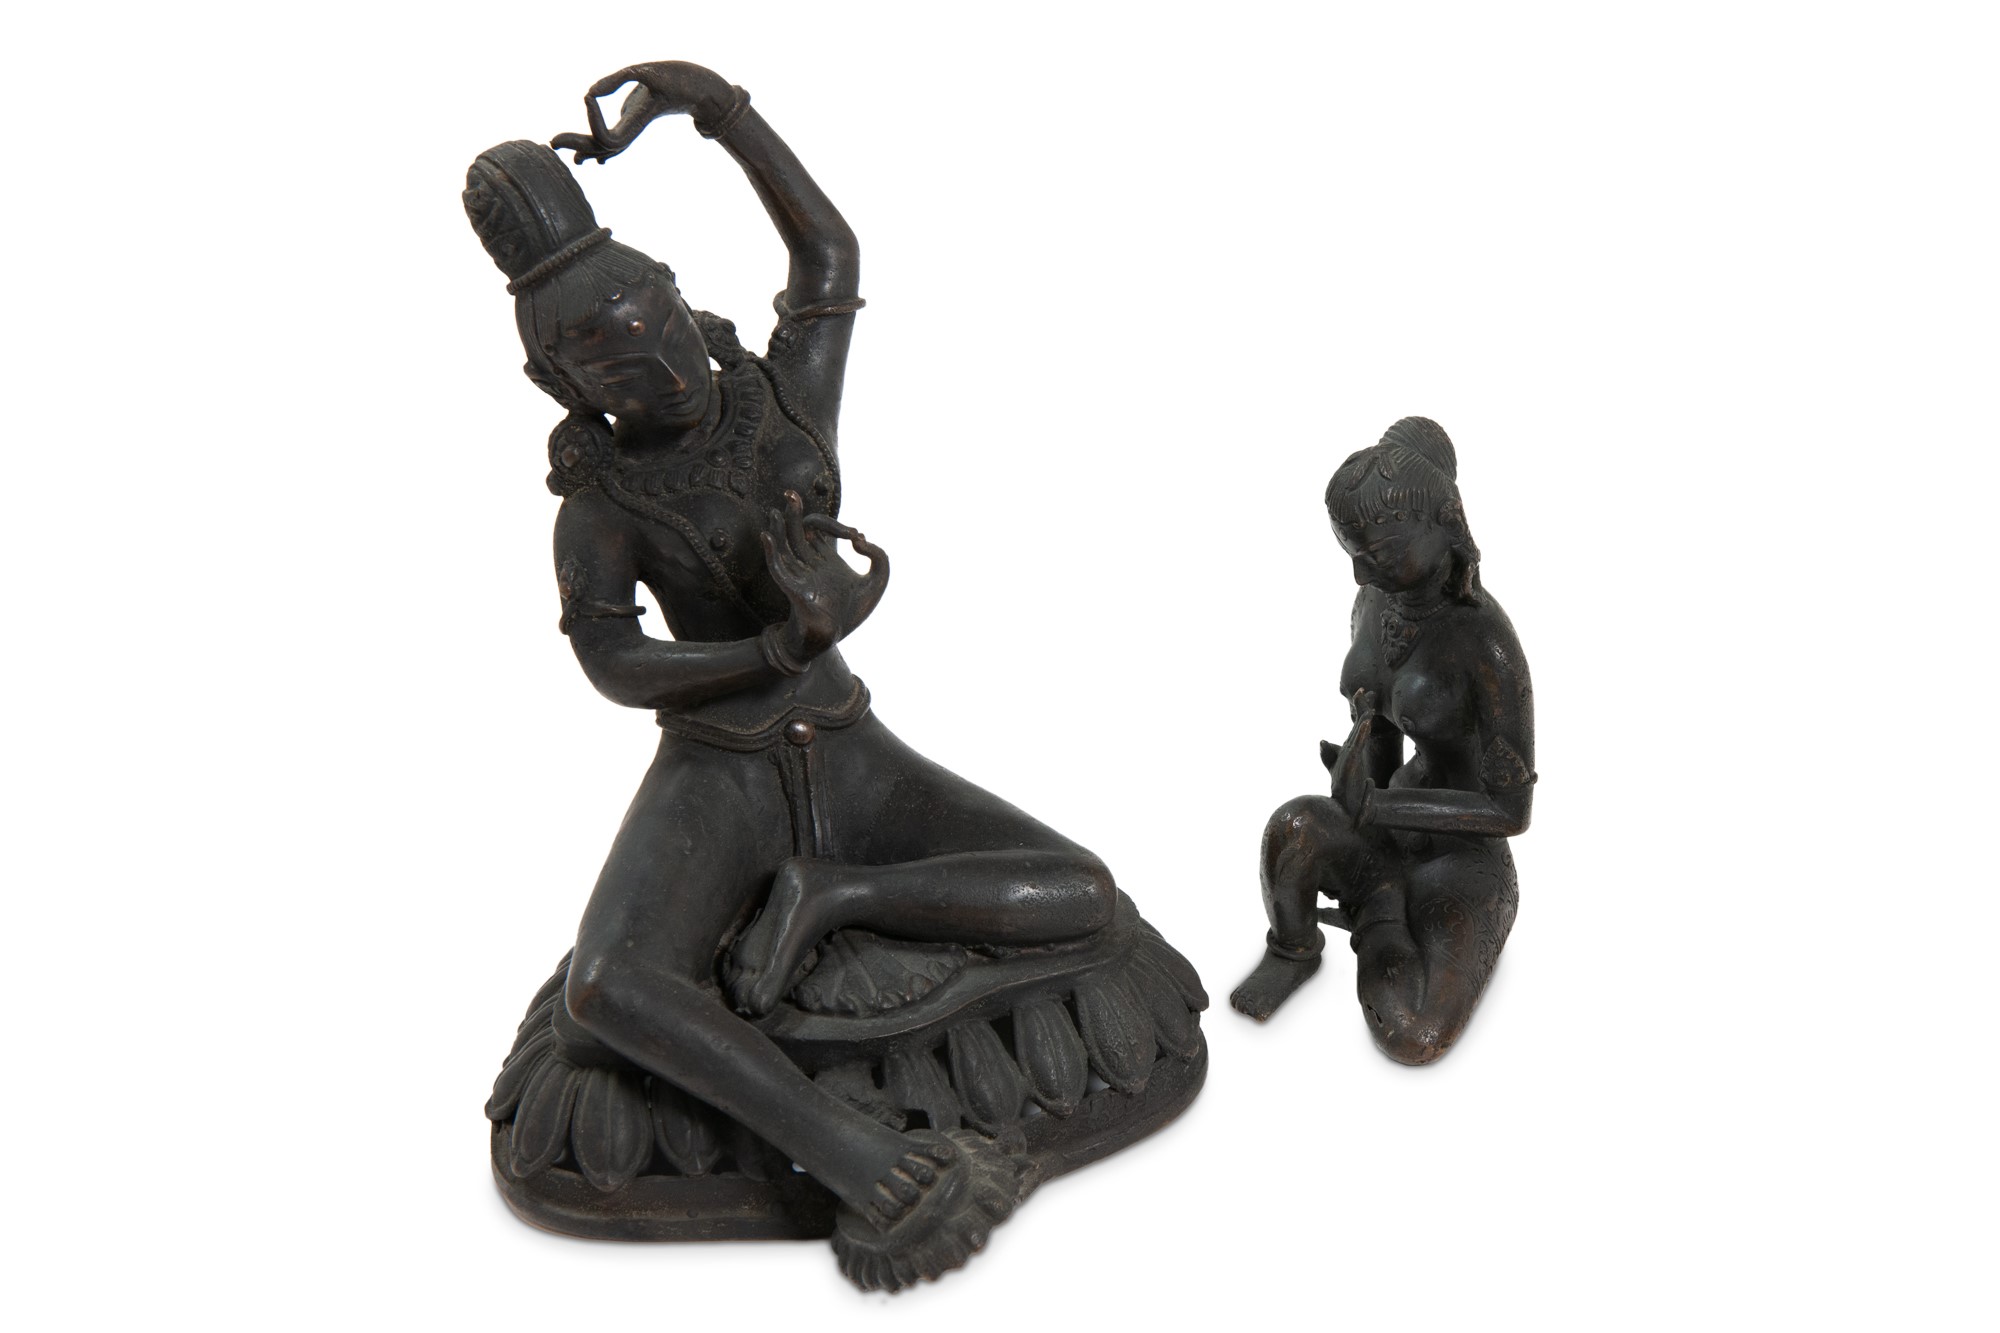 Lot of two bronze deities manifacture sud-est asiatica, 20th century, h 20 cm and 13 cm - Image 2 of 4